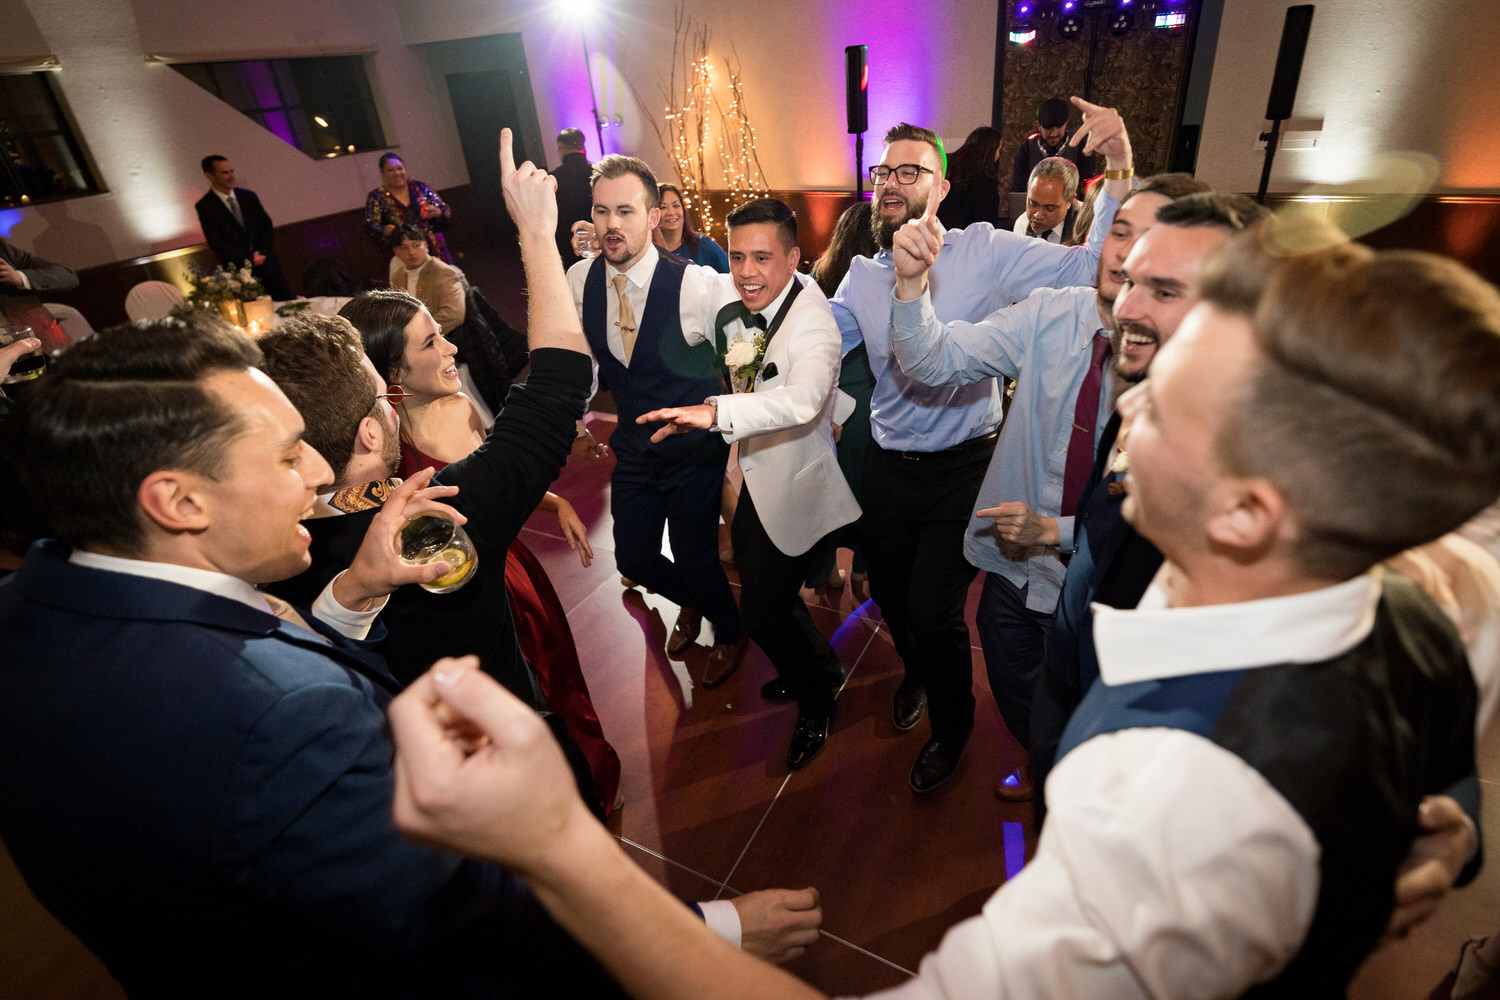 Dancing with friends at a Mountain Room wedding reception.